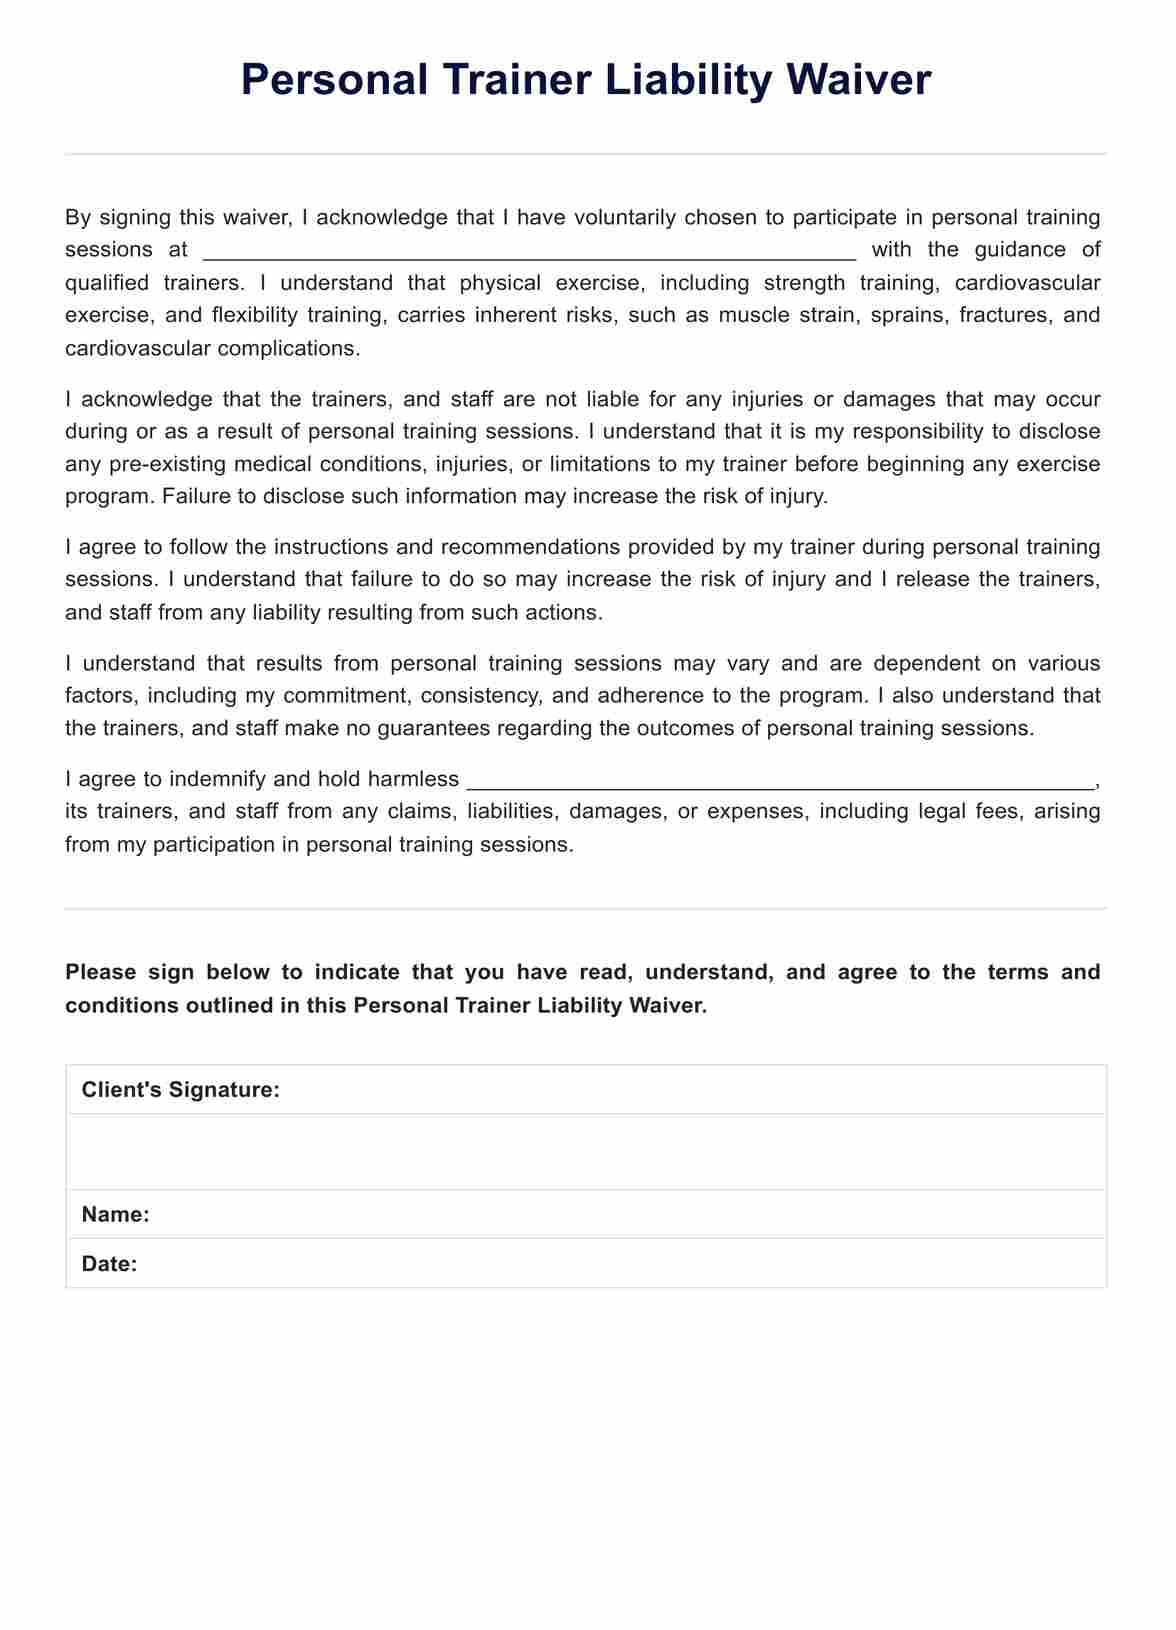 Personal Trainer Liability Waiver Form PDF Example